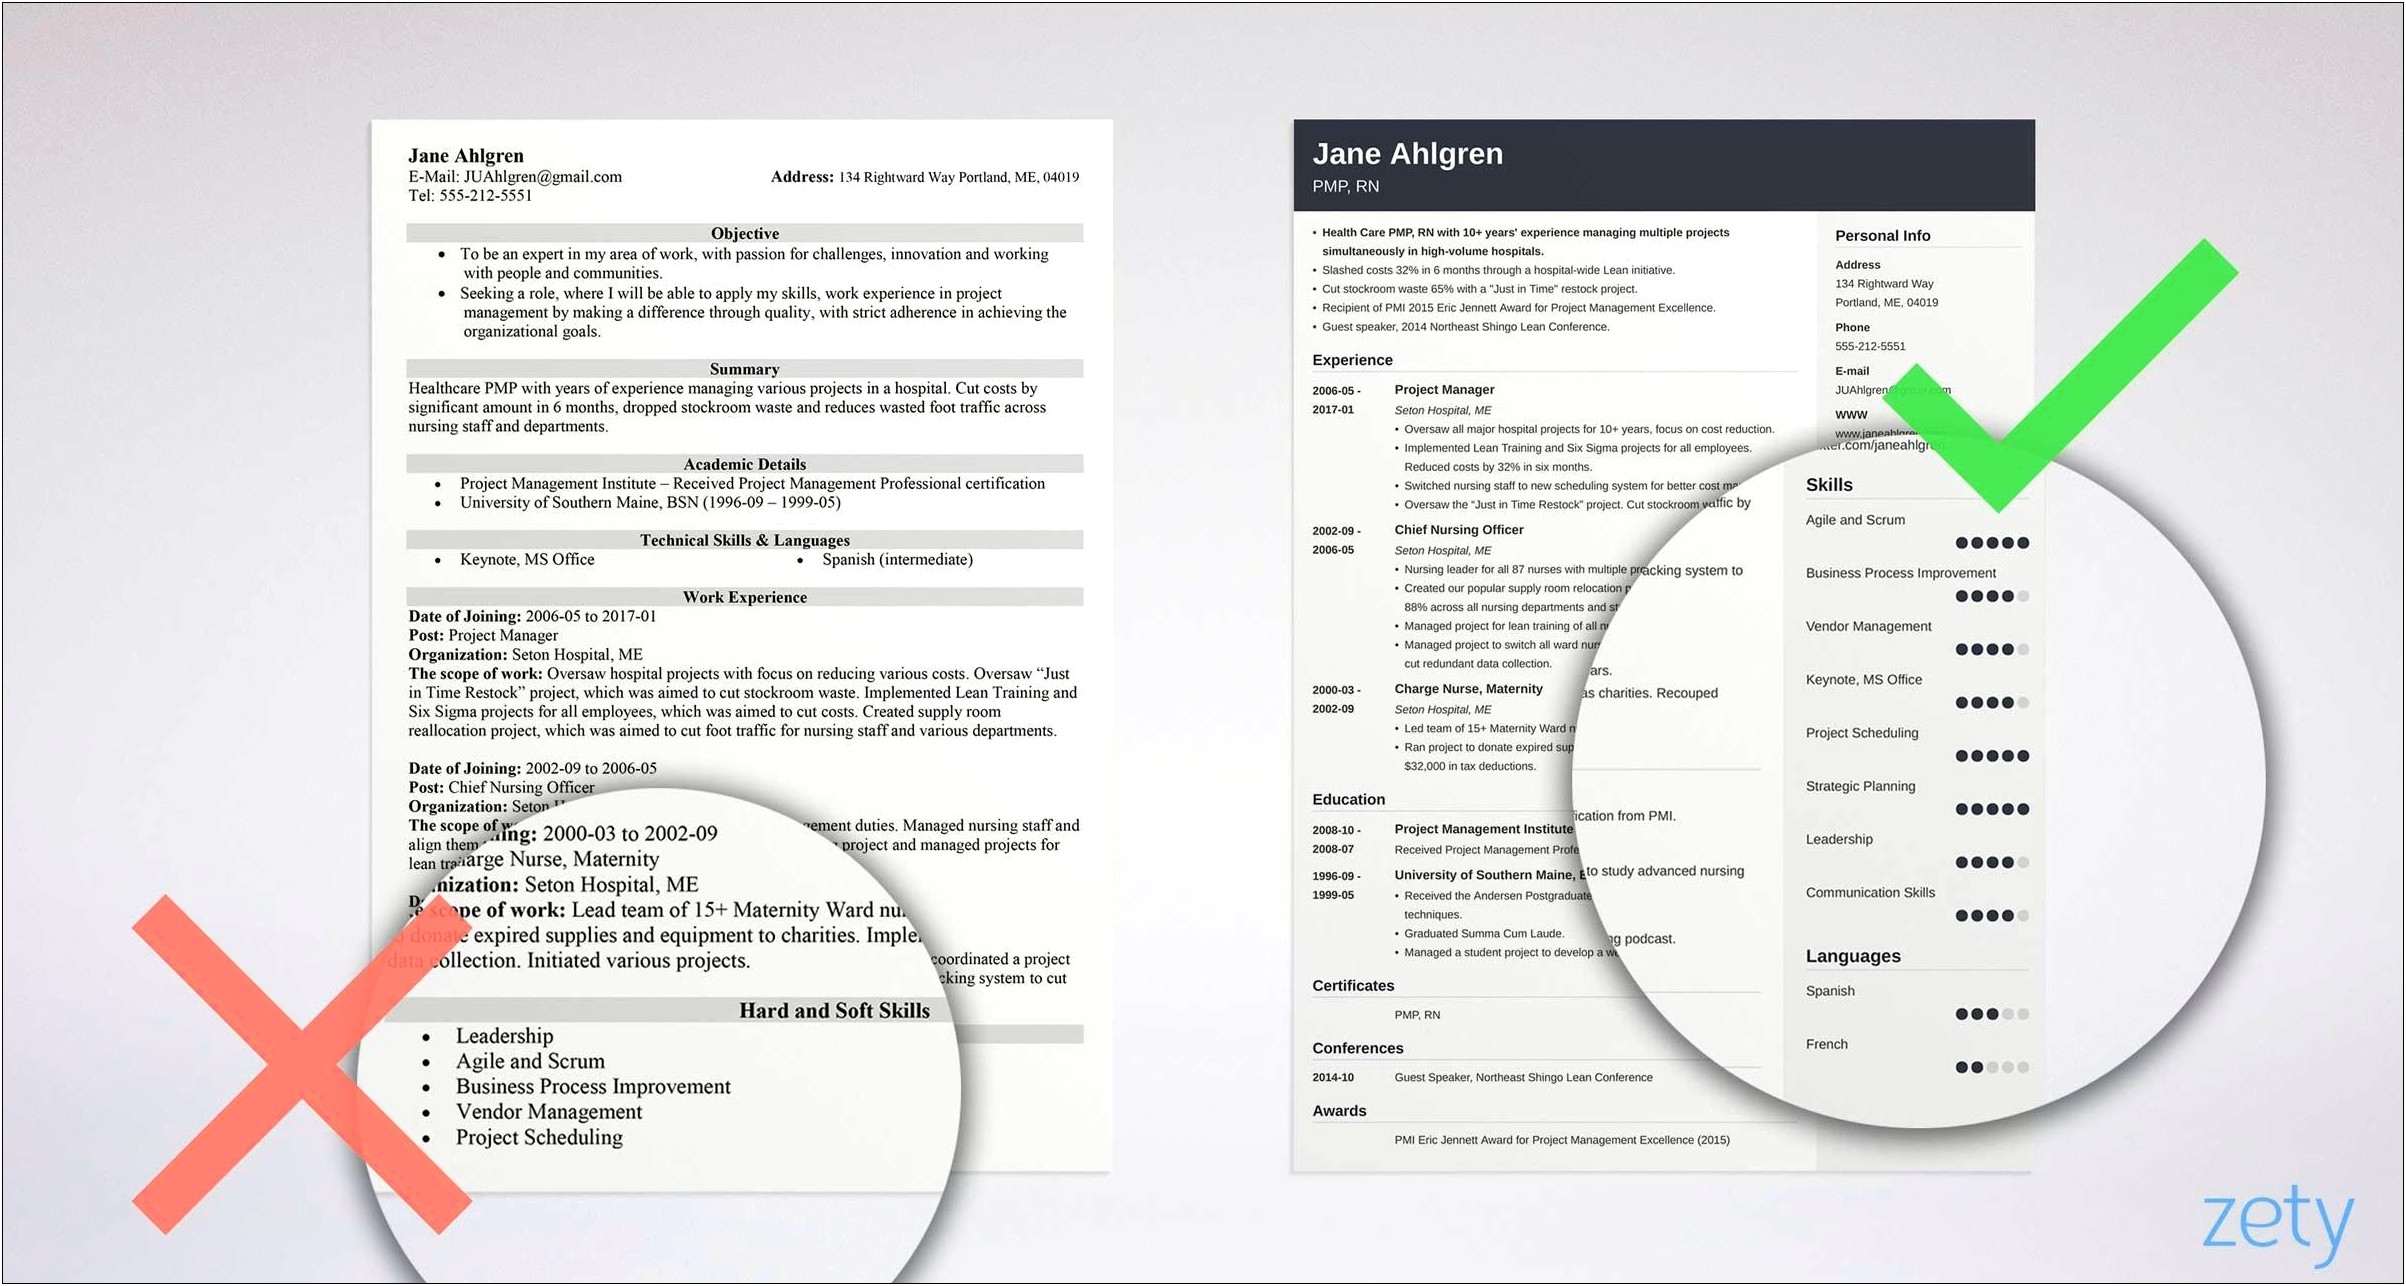 Resume Experience For Maintaing And Setting Up Computers